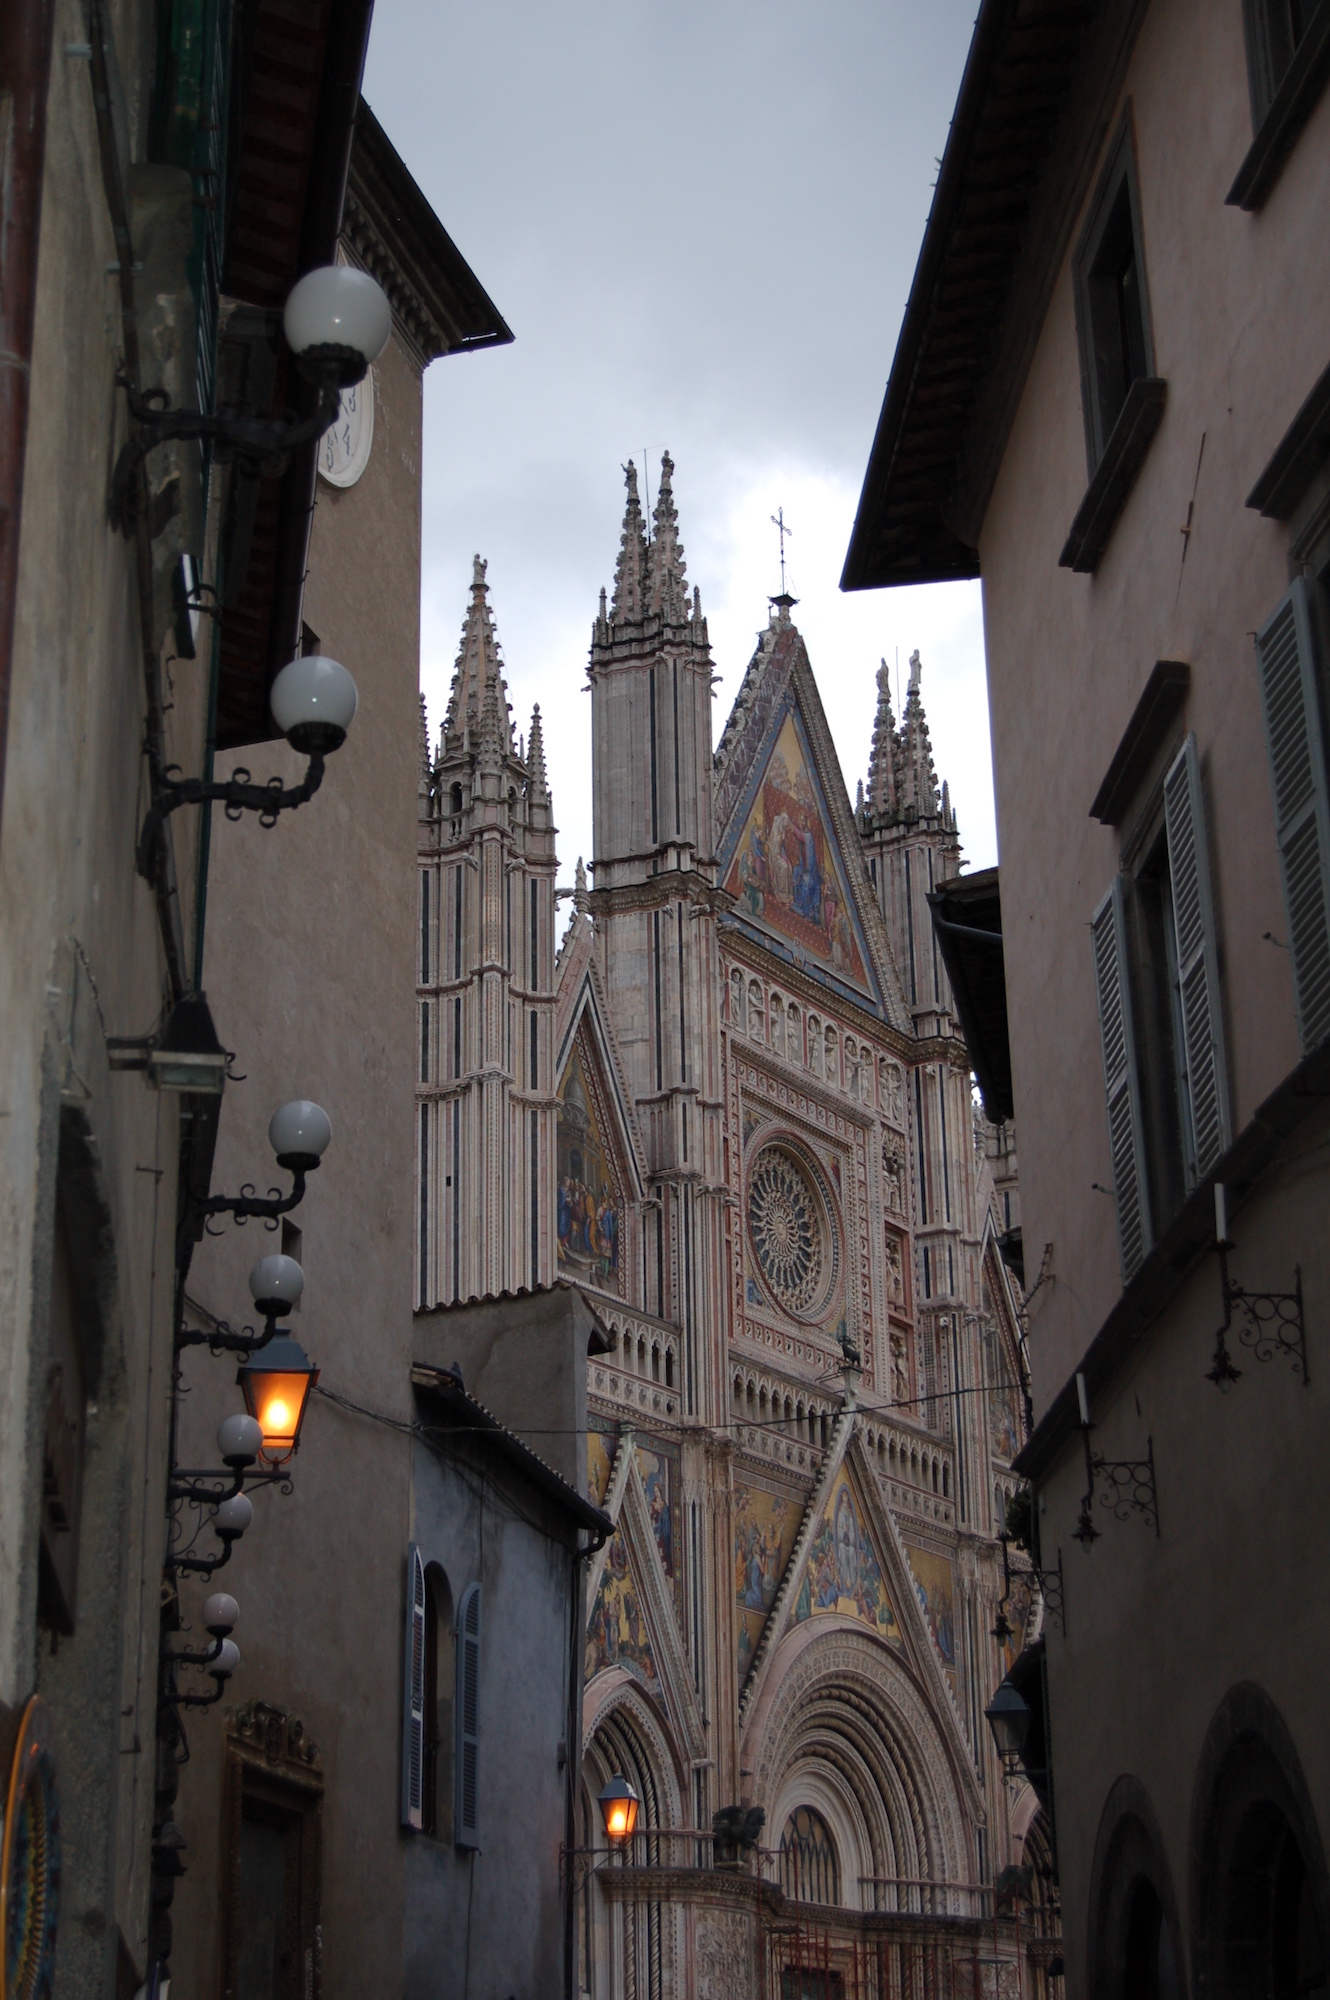 The Duomo of Orvieto from the side streets